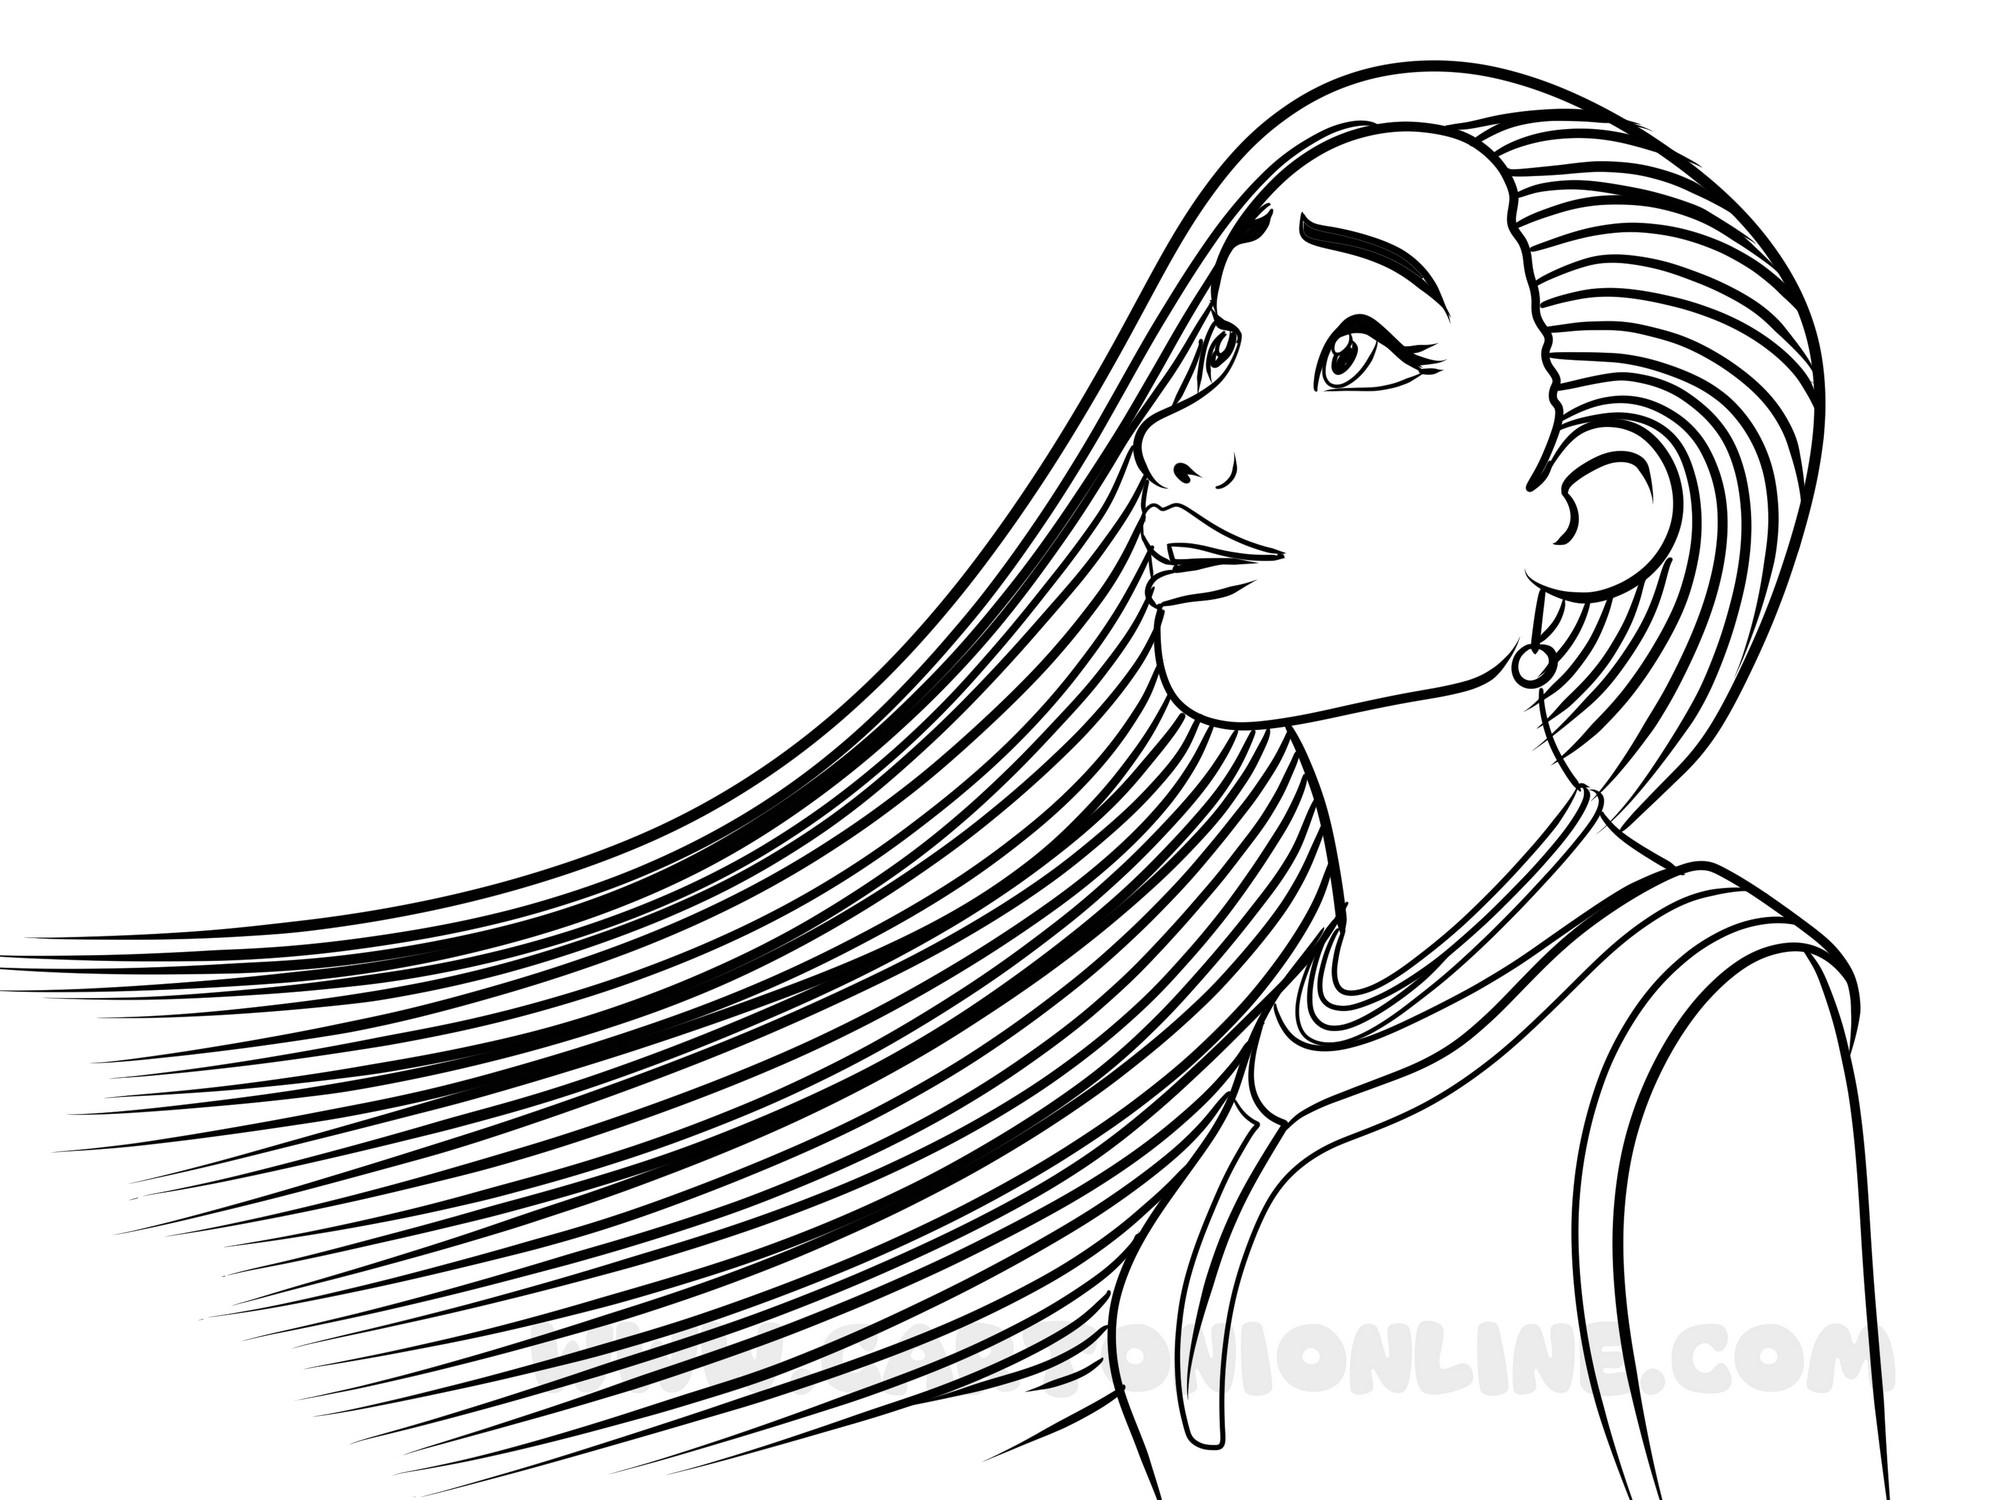 Asha 02 from Wish (Disney) coloring page to print and coloring